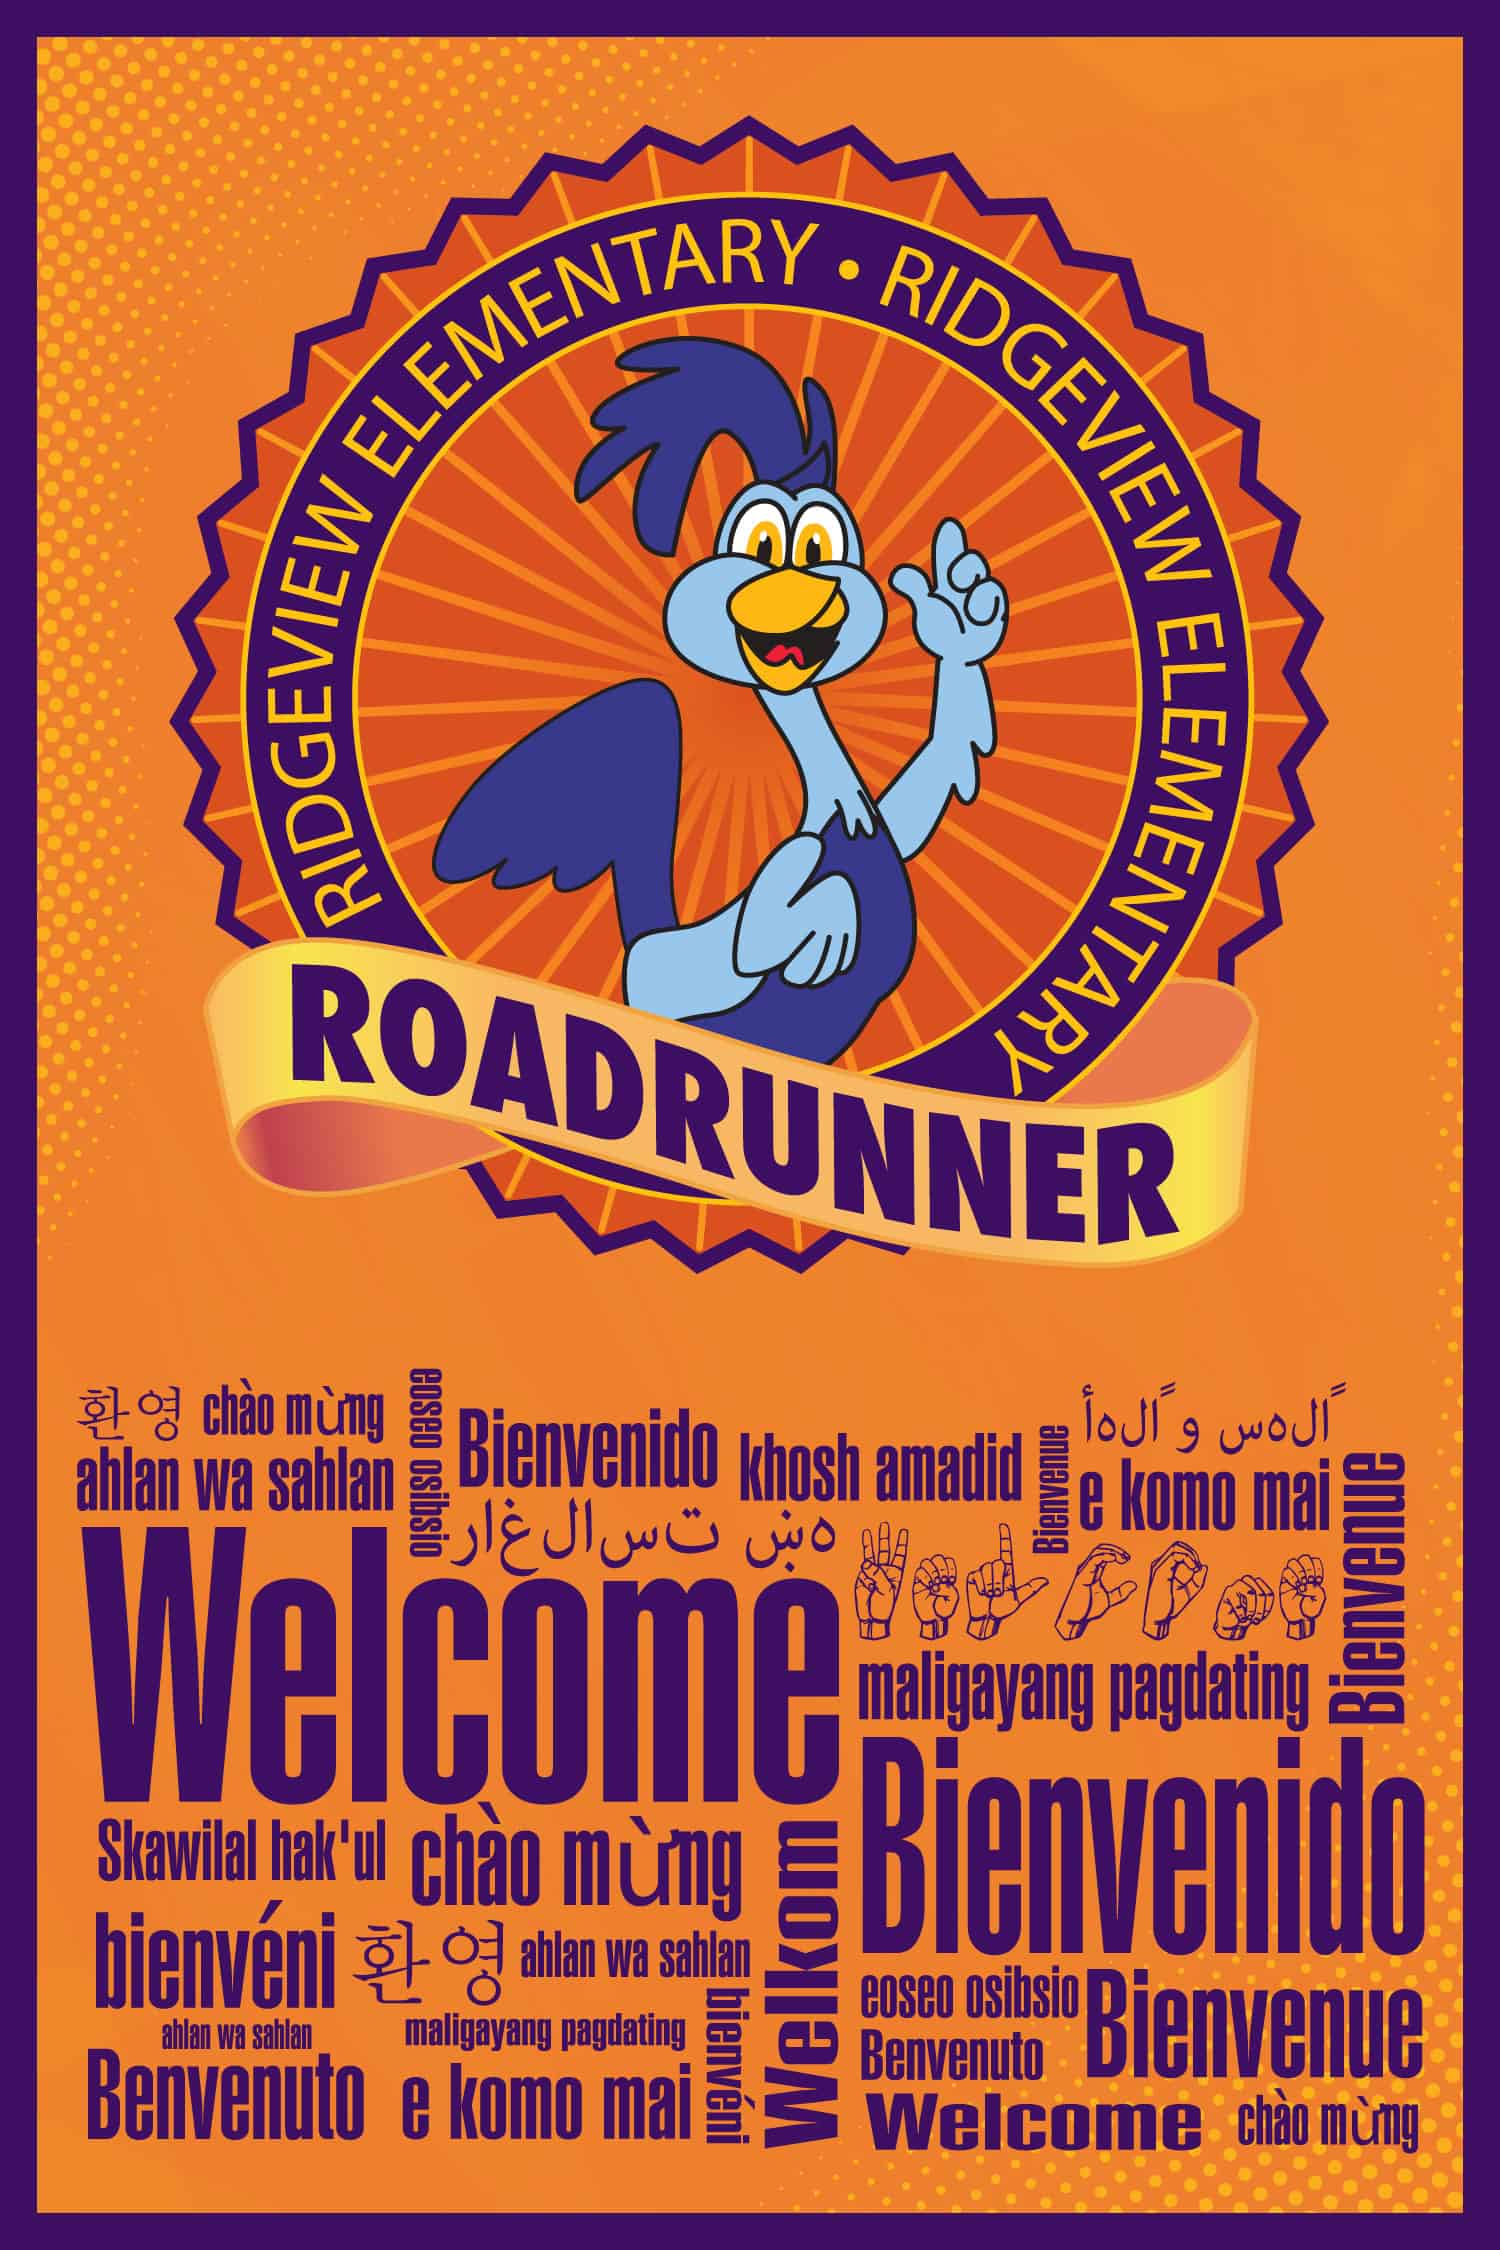 Welcome-inclusive-poster-roadrunner